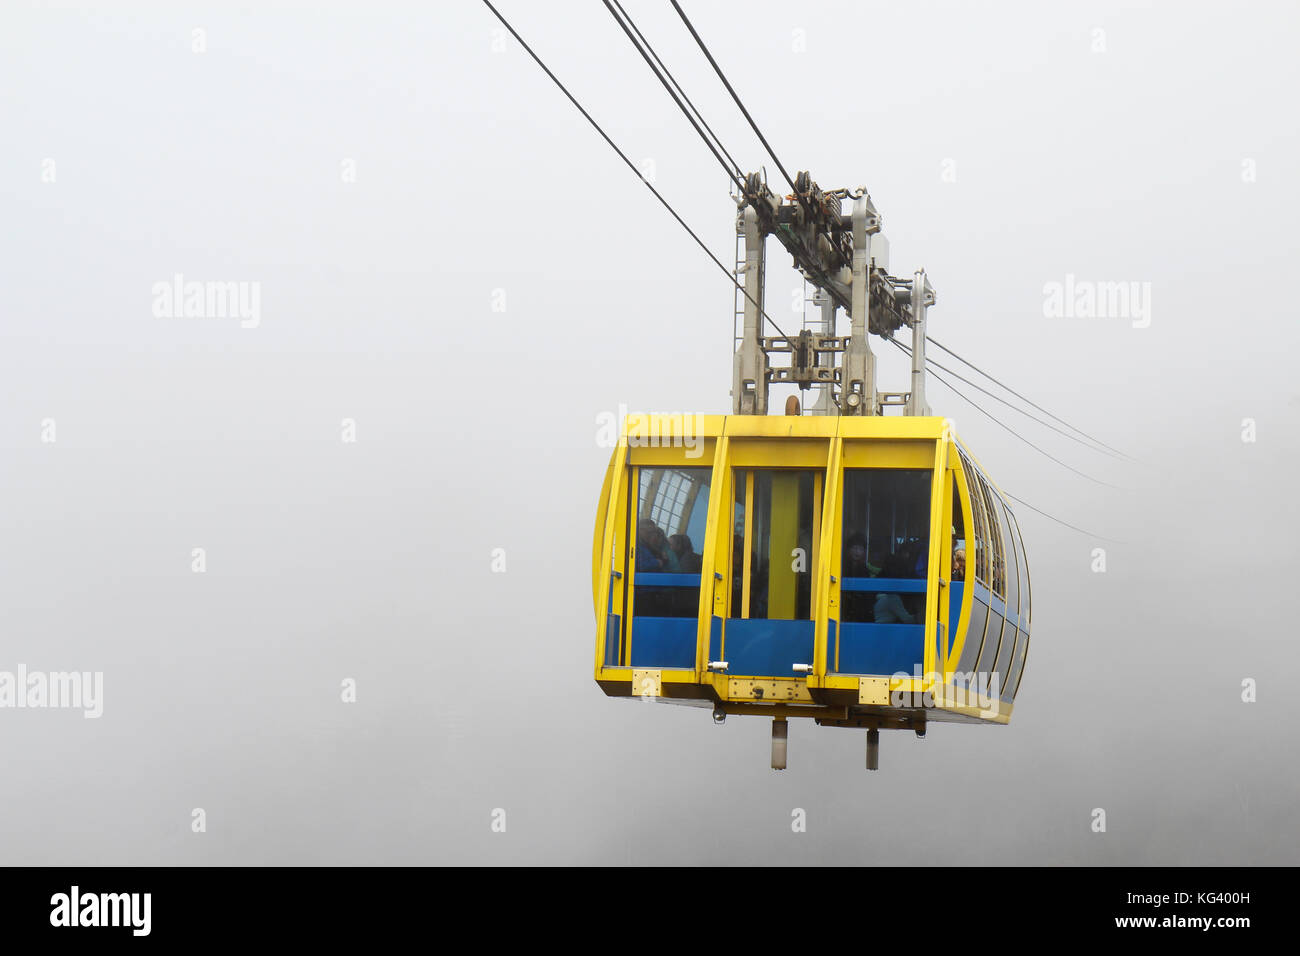 KATOOMBA, AUSTRALIA - SEPTEMBER 25 2015: The Scenic World Skyway comes out of the mist that swirls around the Blue Mountains, a World Heritage site in Stock Photo